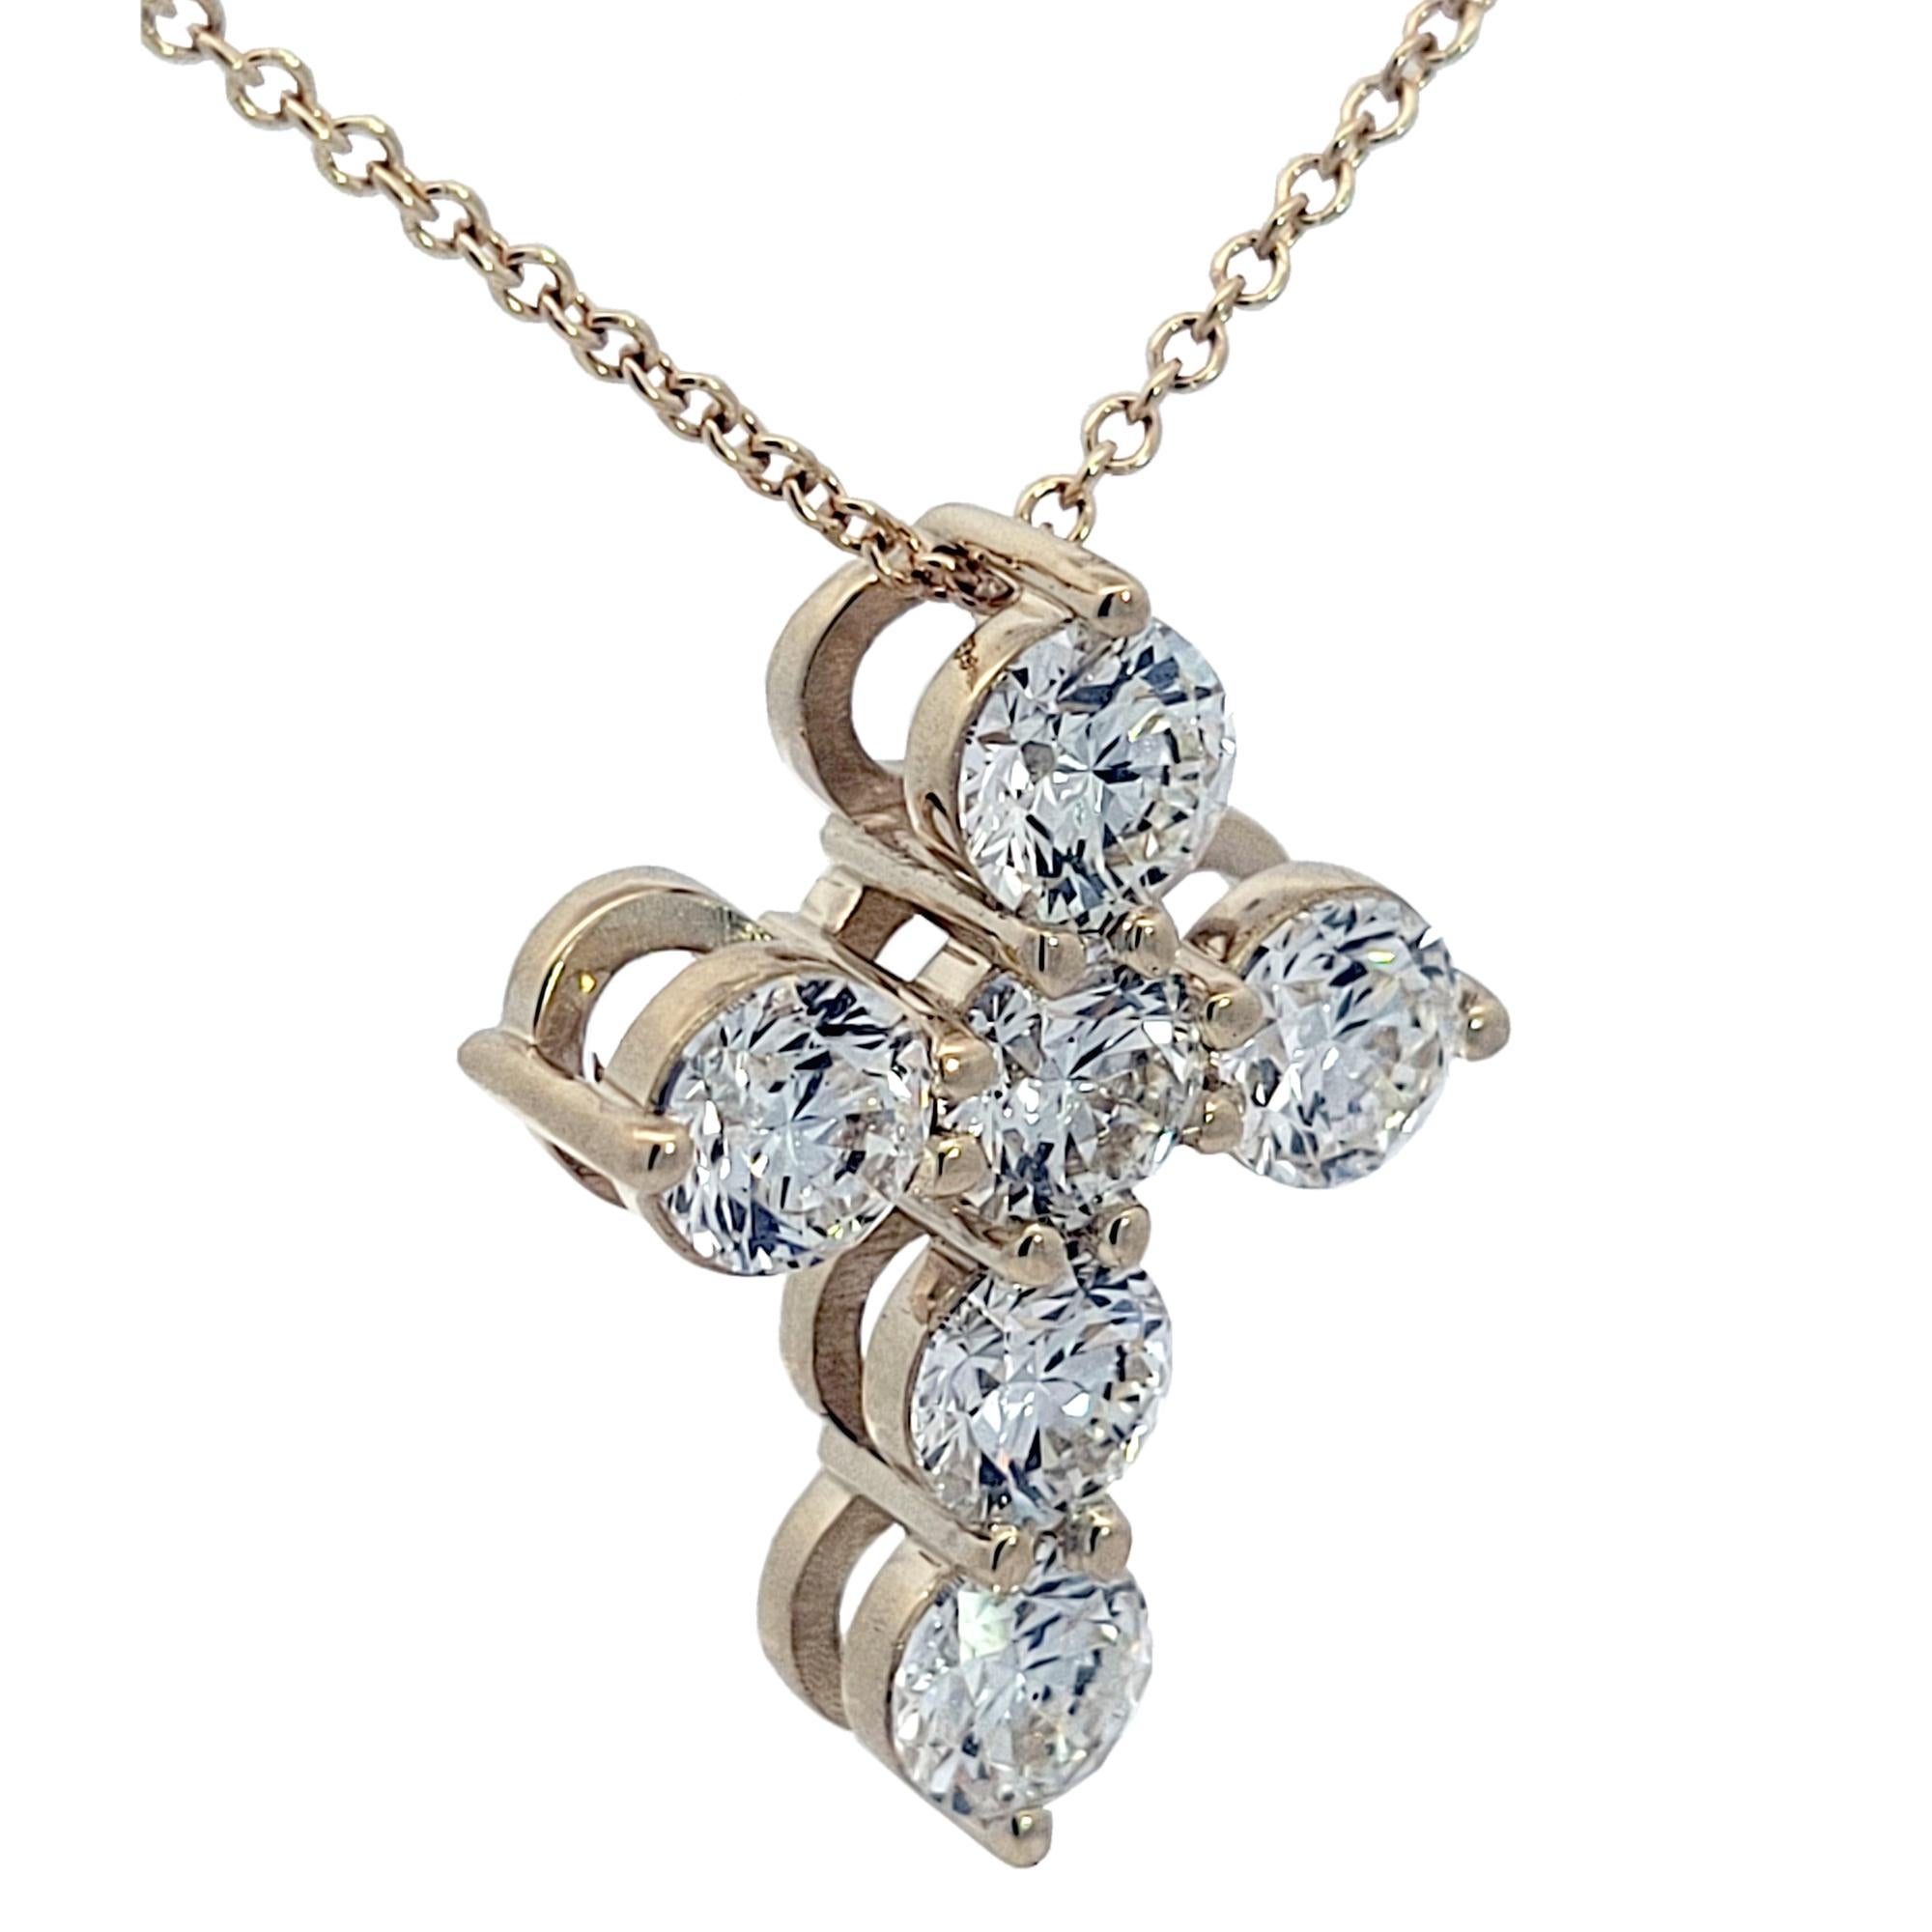 14K Gold Beautiful Cross Pendant with 6 perfectly matched Round Brilliant Diamonds with total weight of 2.73 Ct .
Size 16 mm x 22 mm .
Metal: 14K Yellow Gold 3.2 gr.
Round diamonds: 6x4.9 mm Shared Prong Set with total weight of 2.73 Ct.
Diamond